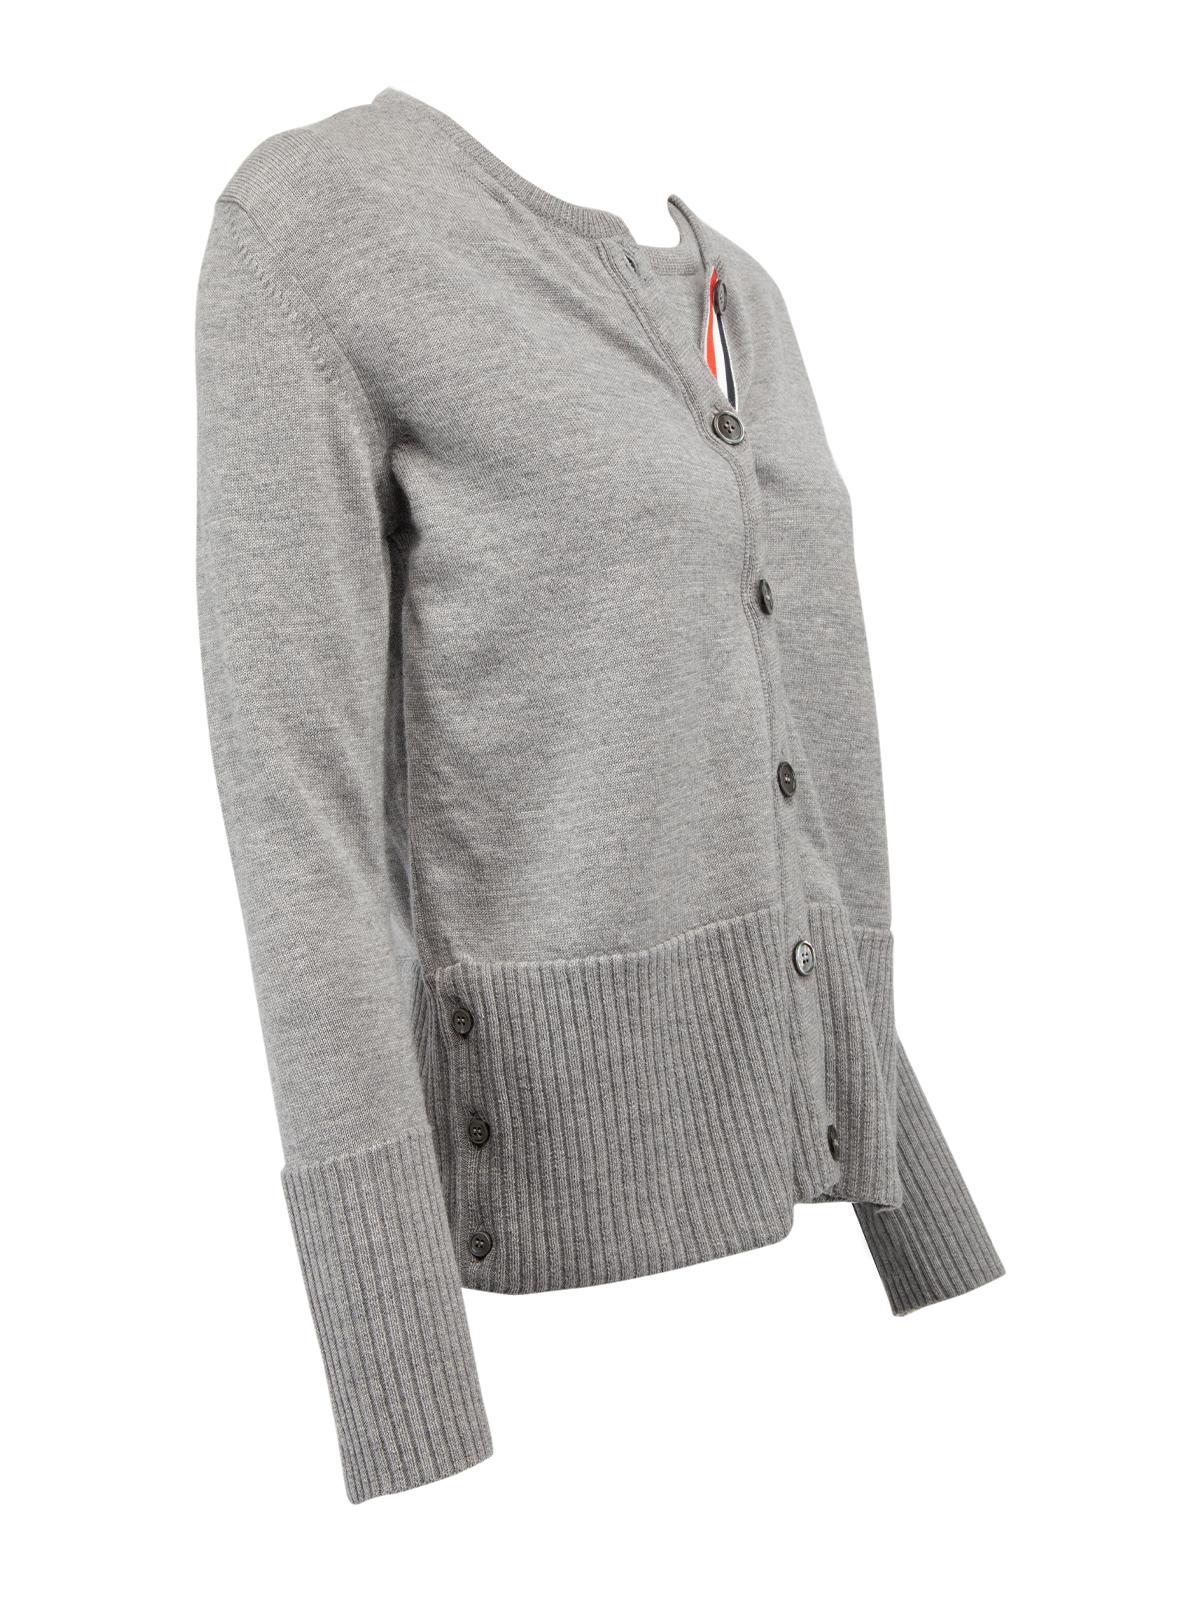 CONDITION is Never worn with tags. No wear and pilling to cardigan is evident on this used Thom Browne designer resale item. Details Grey Wool and rayon Cardigan Form fitting Long sleeve Round neck Attached inner vest Button fastening Made in Italy